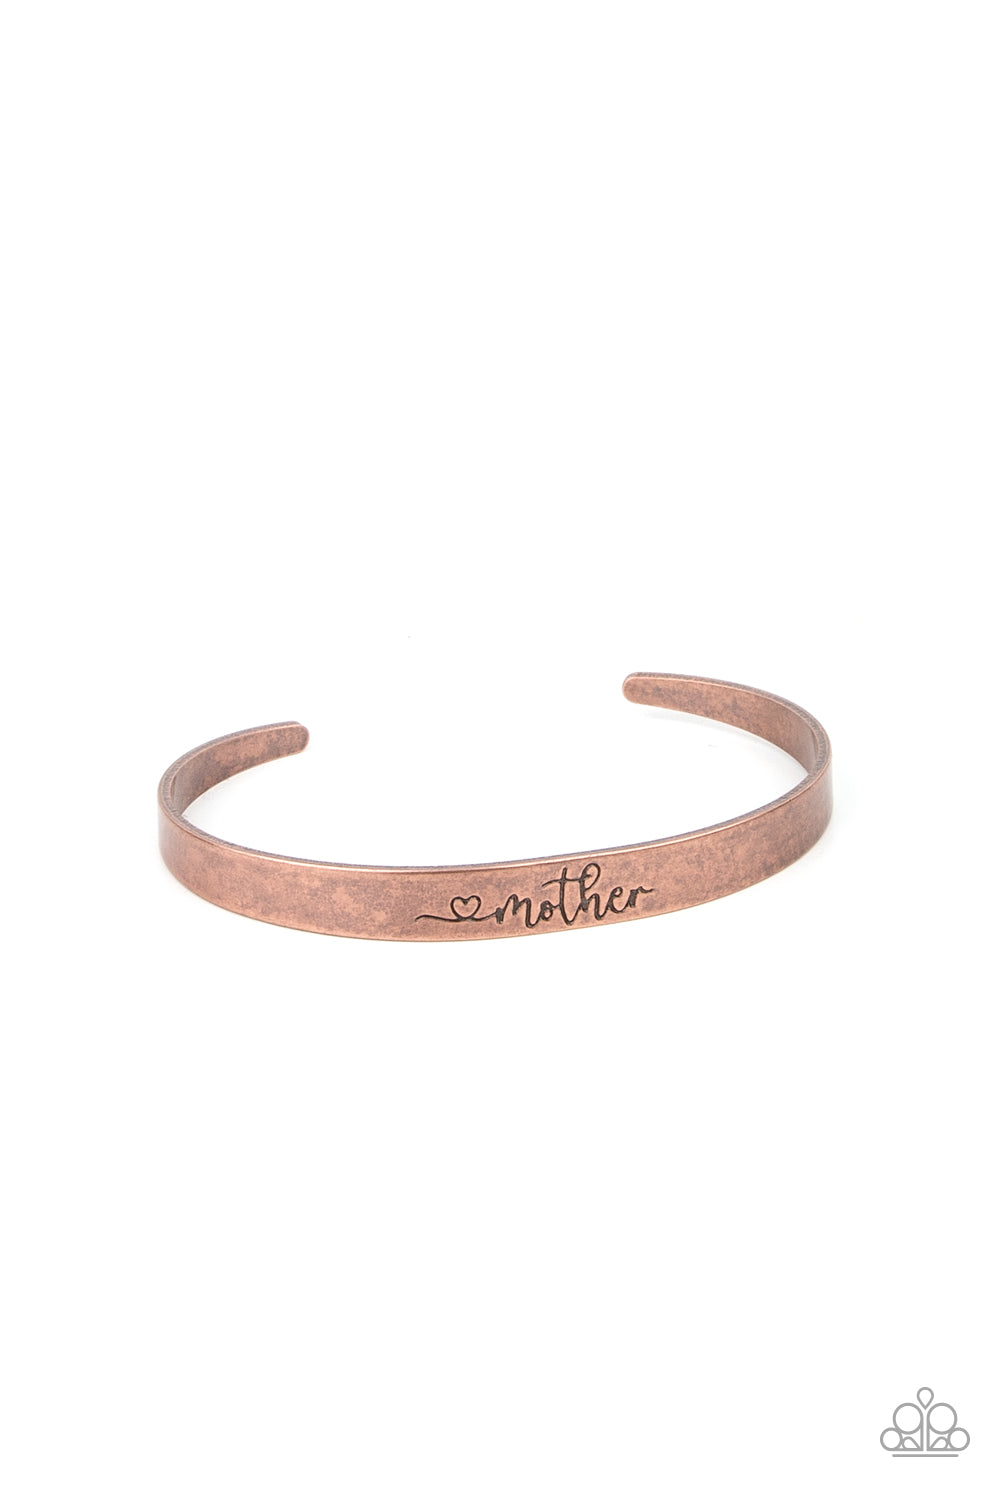 Sweetly Named Paparazzi Accessories Bracelet Copper